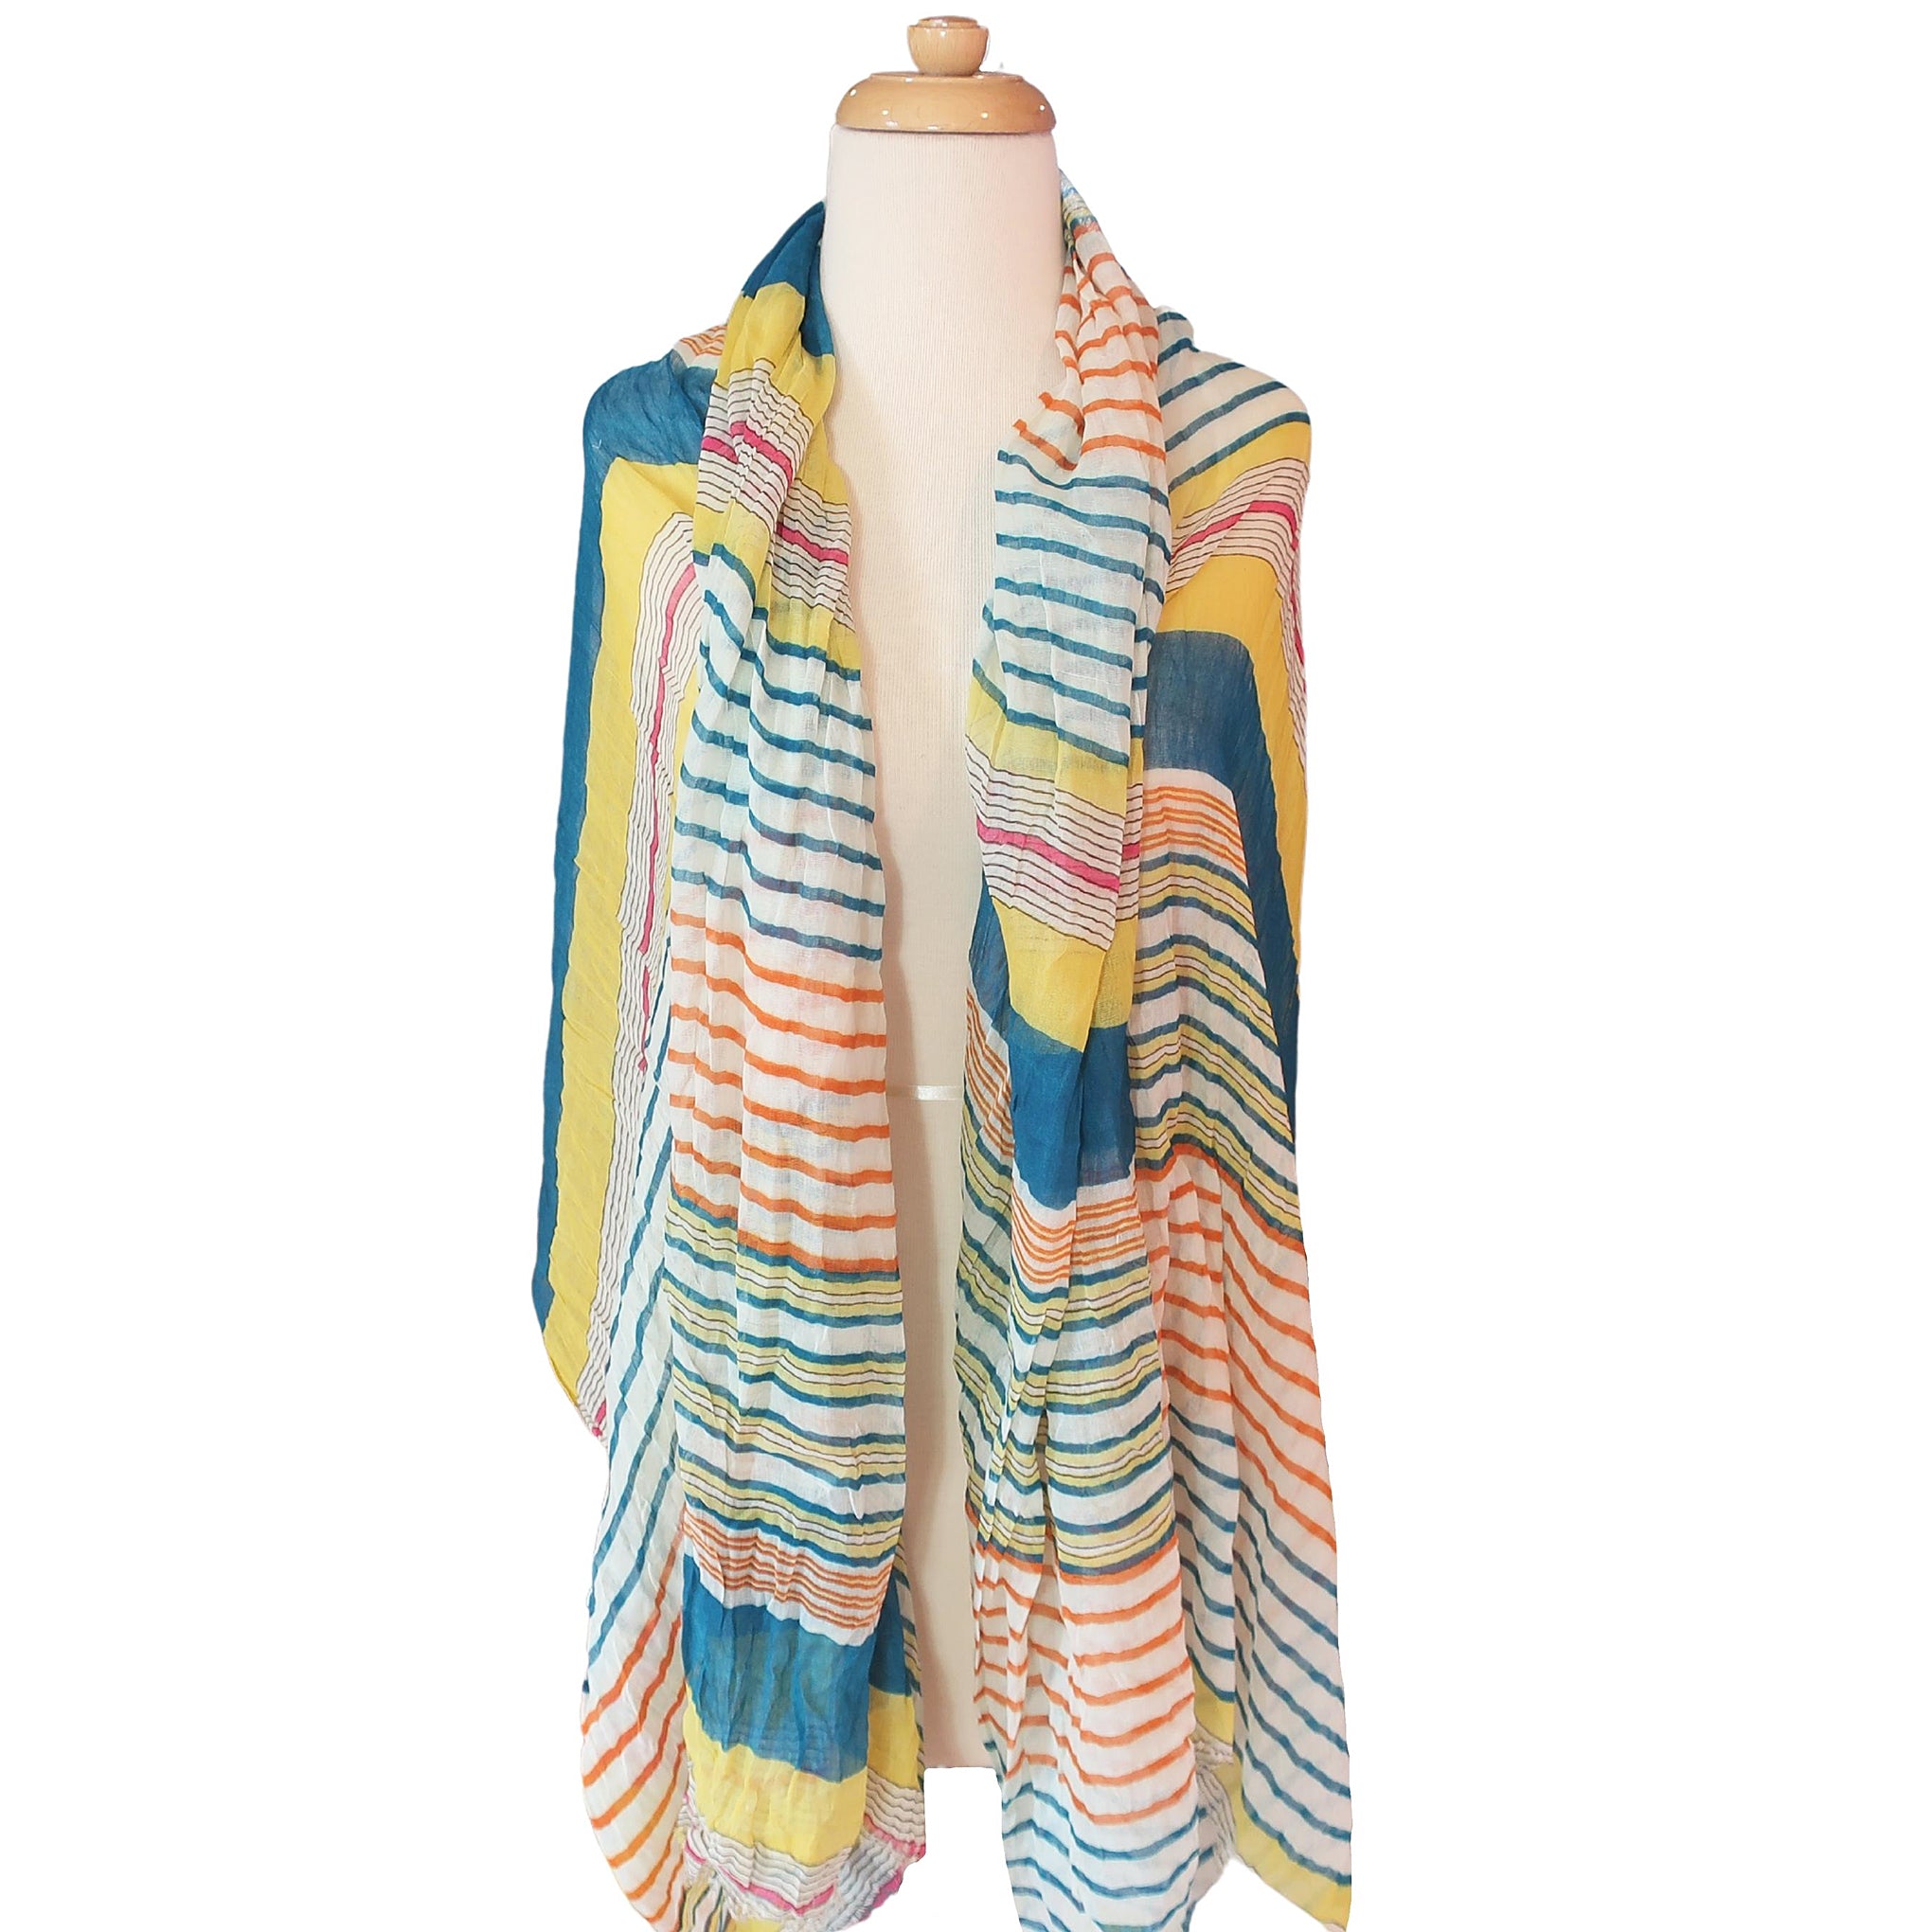 Blue Pacific Cotton Starburst Striped Scarf in Teal Blue and Yellow